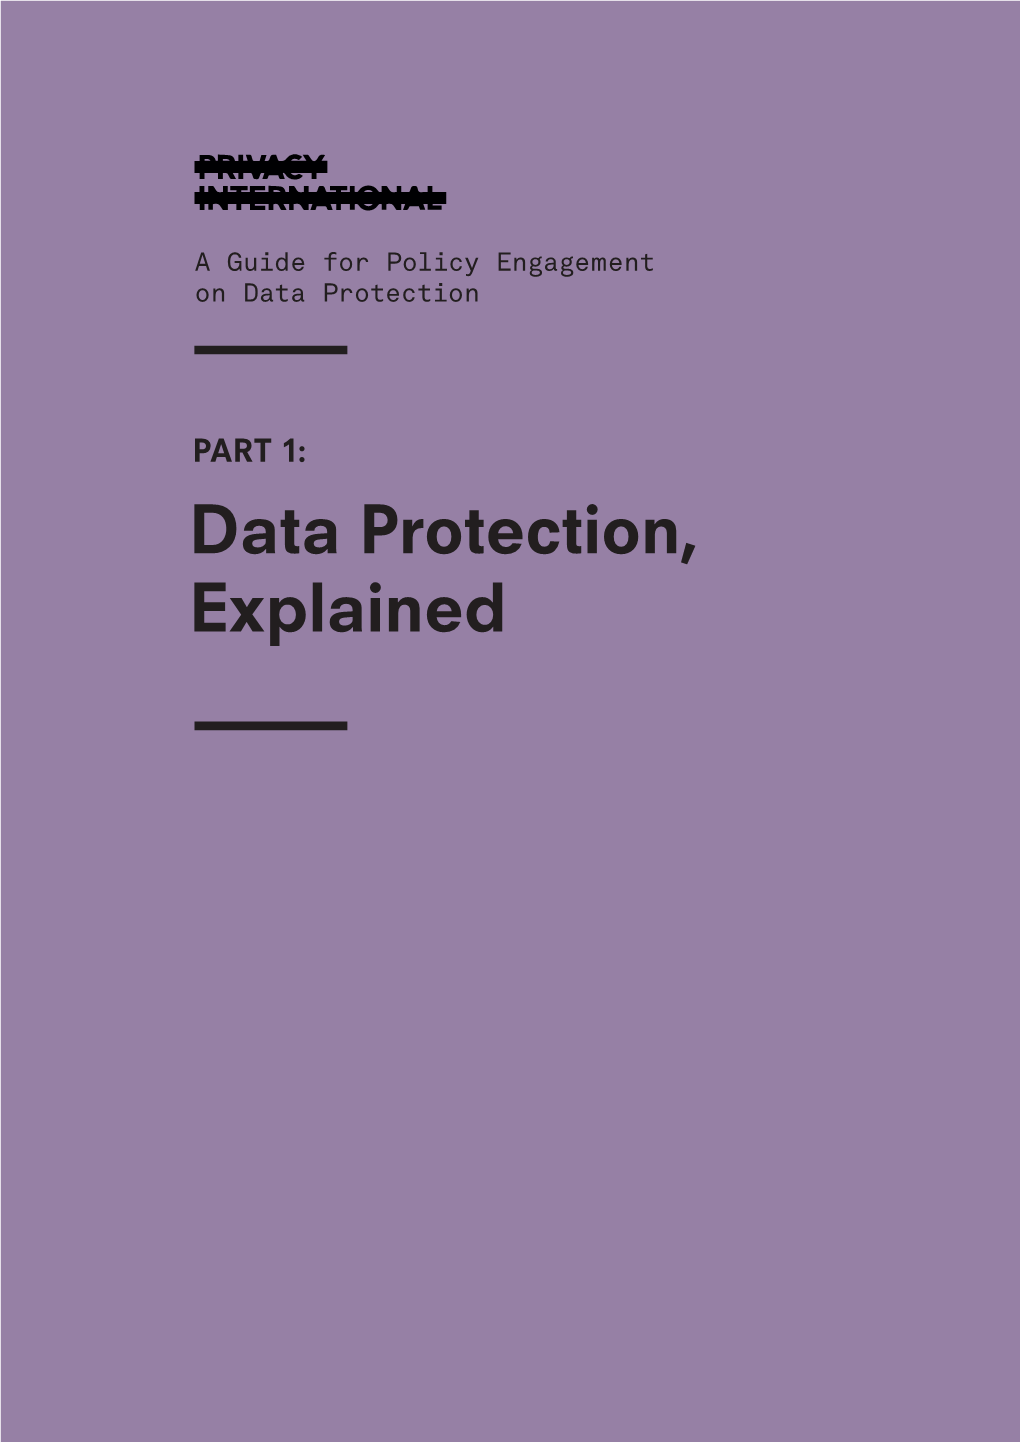 Data Protection, Explained a Guide for Policy Engagement on Data Protection | PART 1: Data Protection, Explained